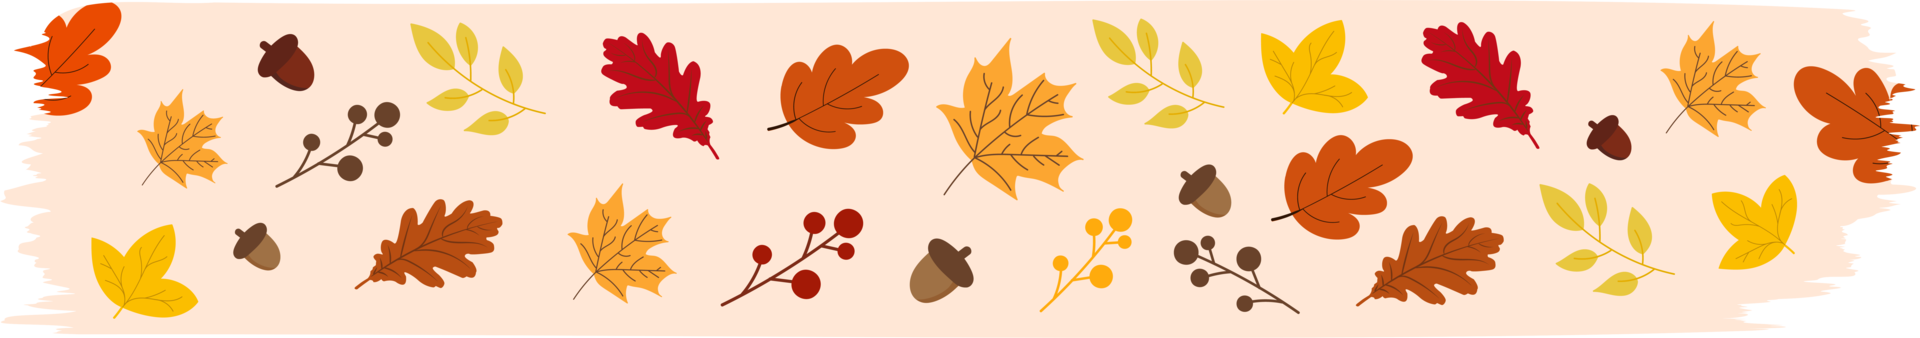 washi tape autumn seasonal with falling leaves, floral elements symbols png